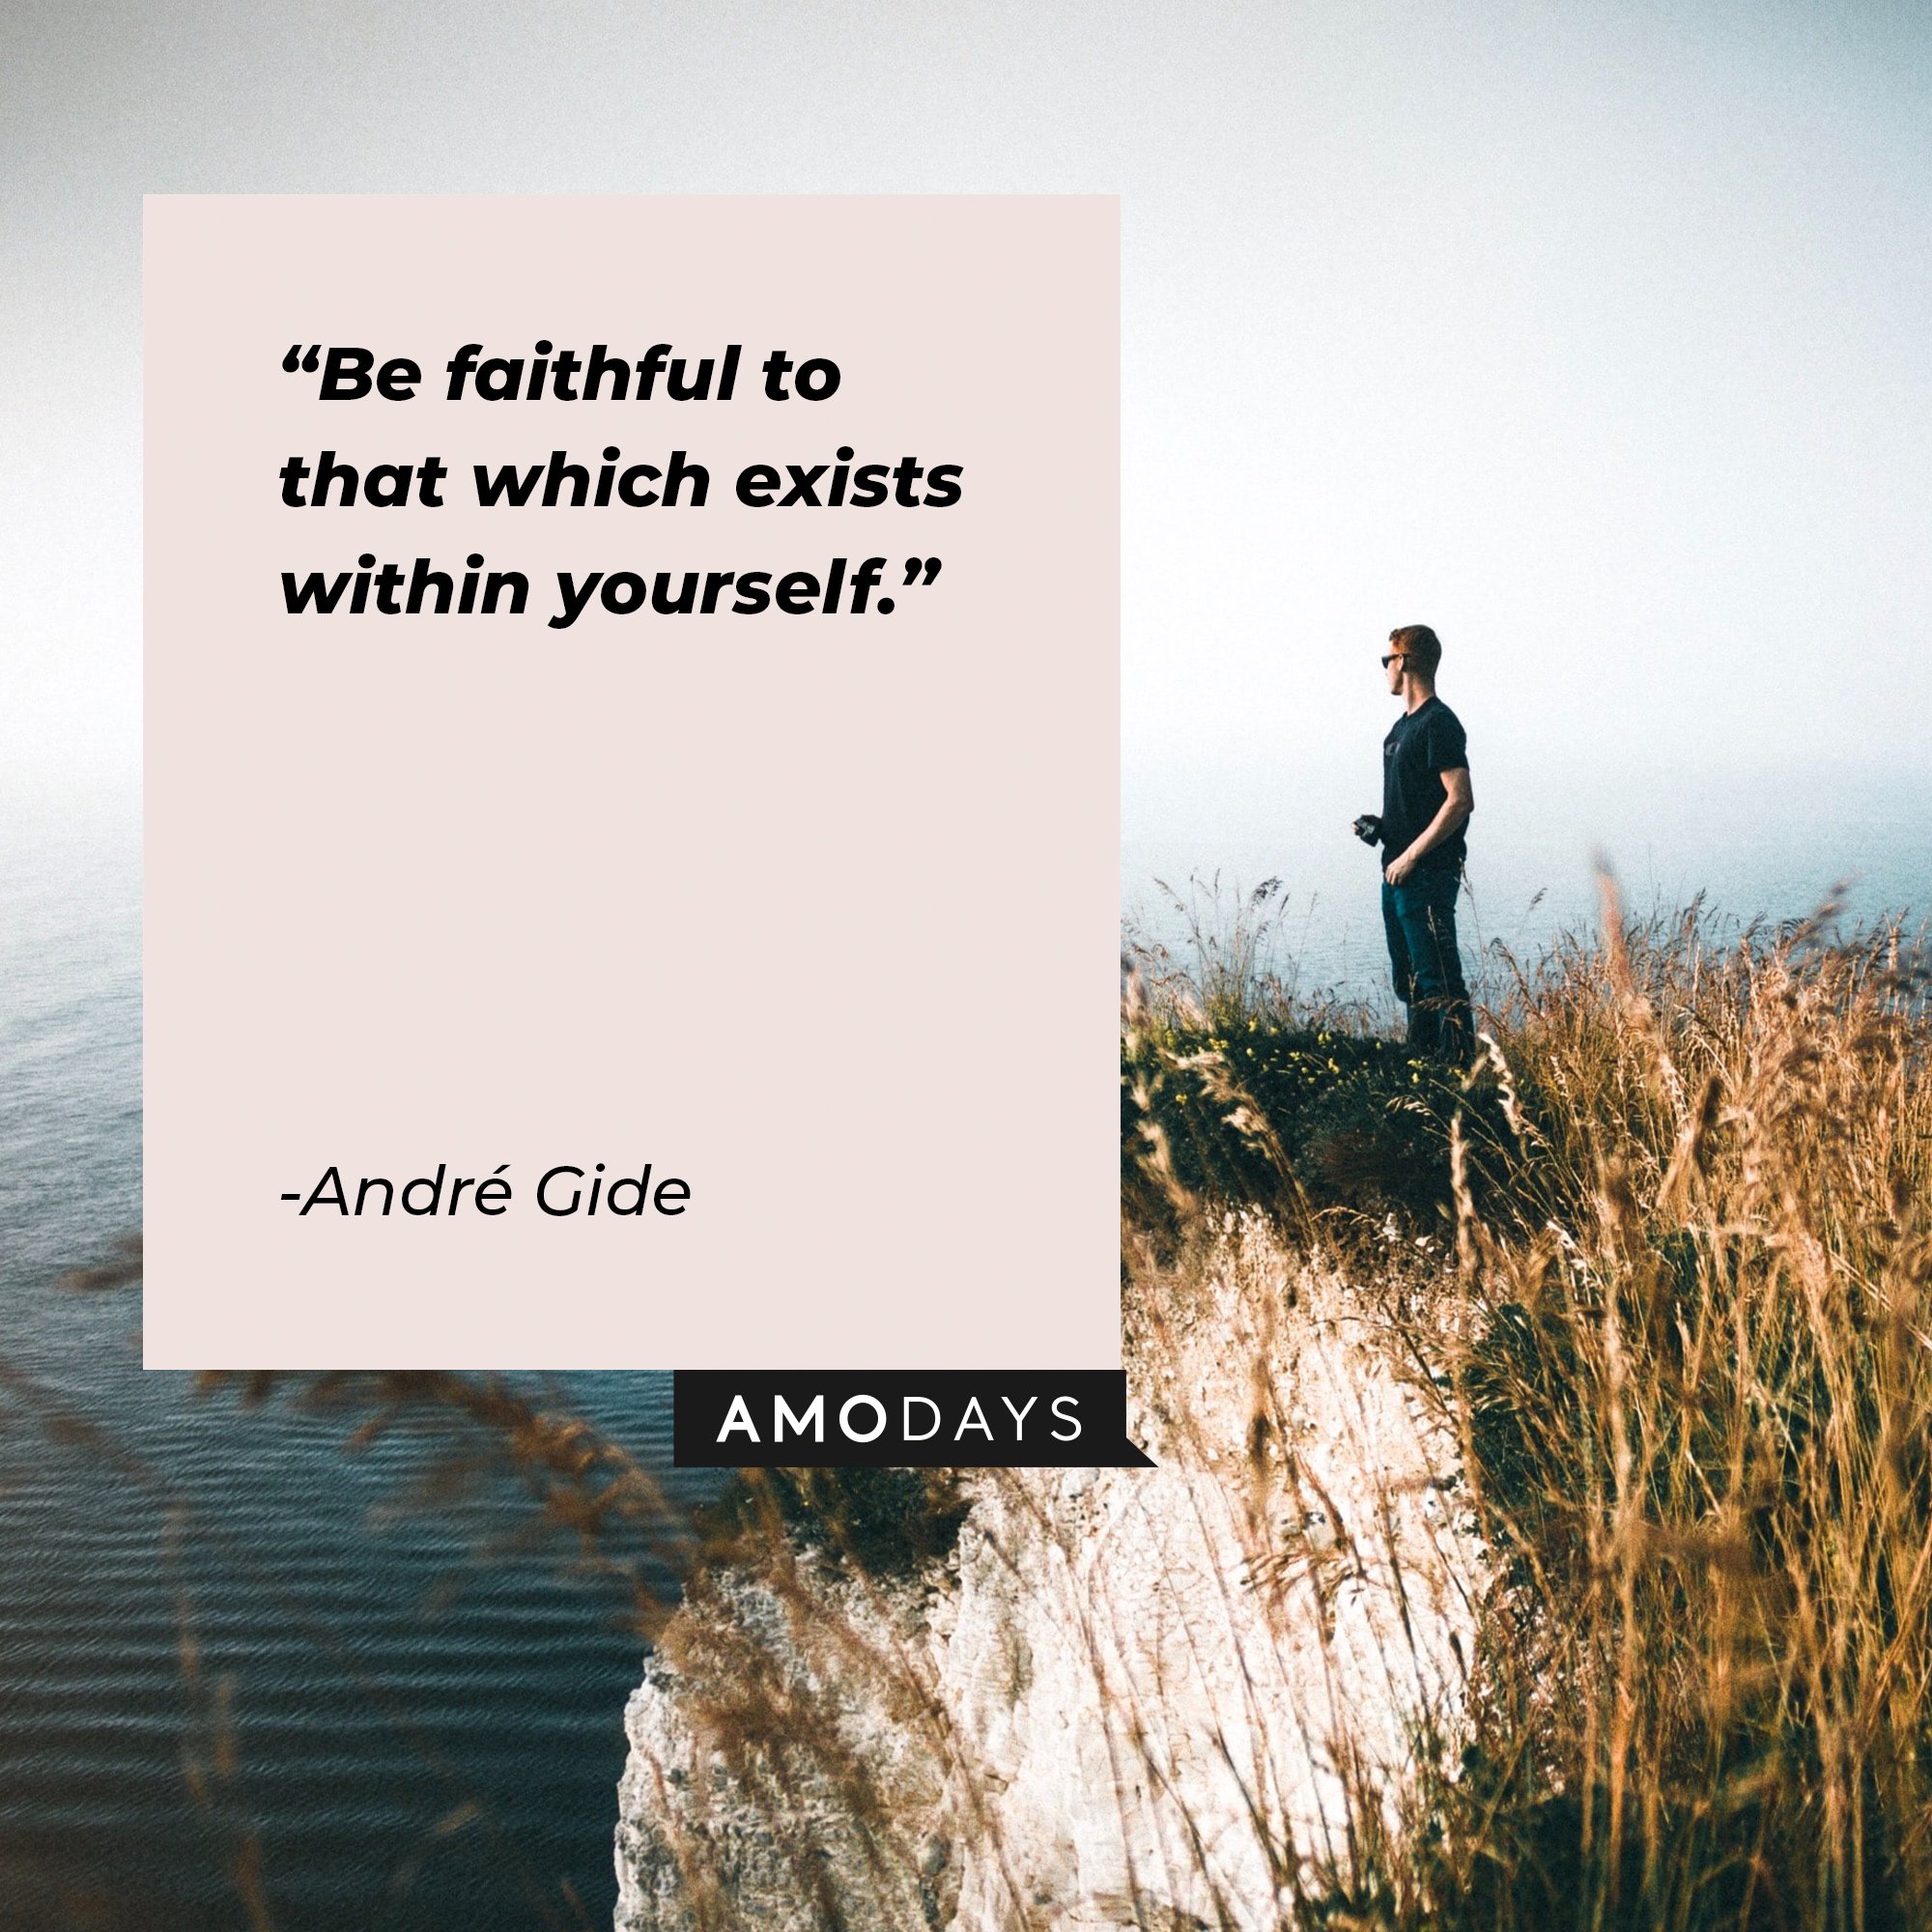 André Gide’s quote: "Be faithful to that which exists within yourself." | Image: AmoDays